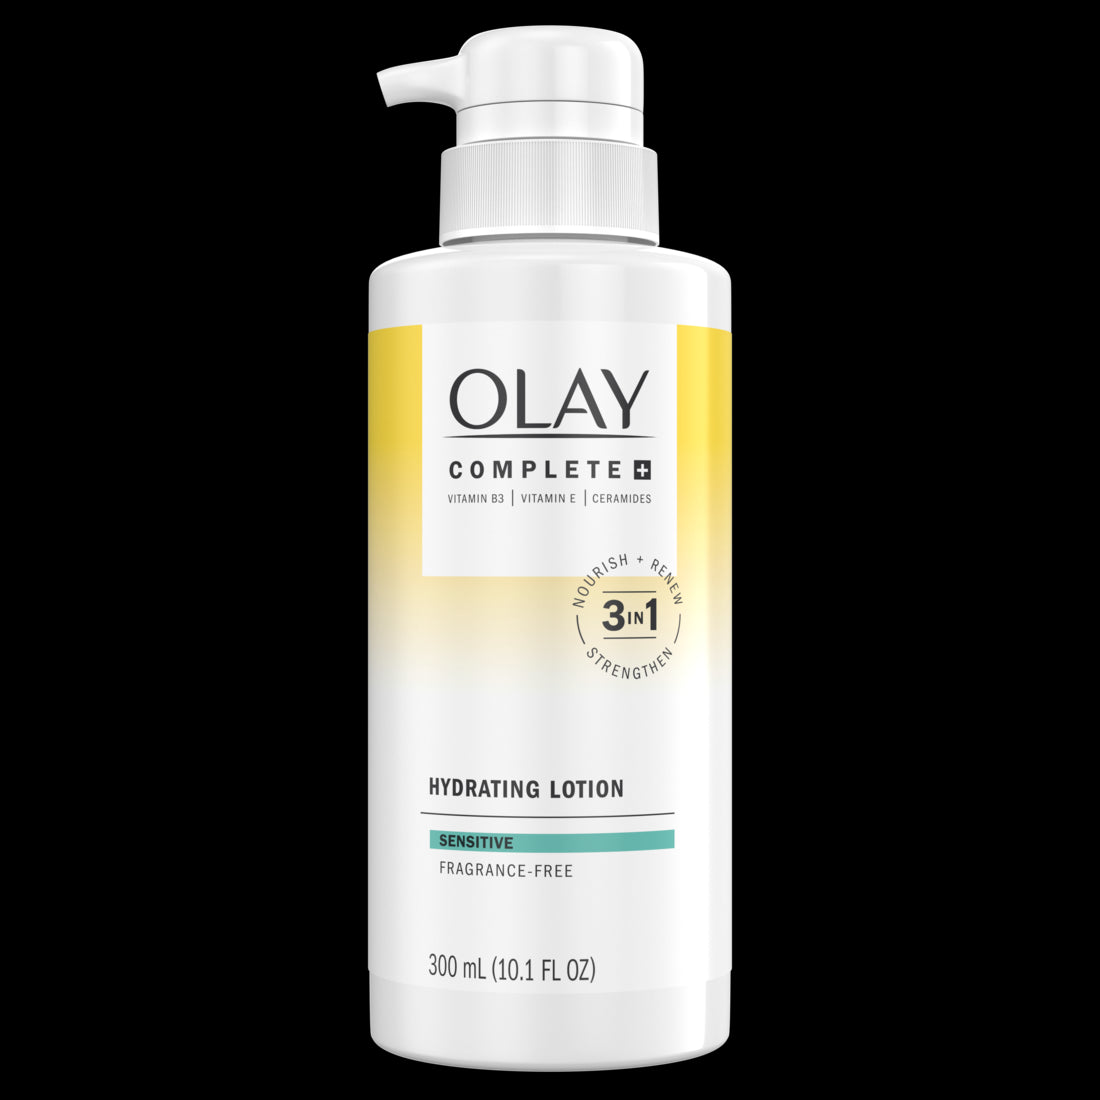 Olay Complete+ Hydrating Lotion Fragrance-Free 3-in-1 Nourishing Face Moisturizer for All Skin Types with Vitamin B3, Vitamin E, and Ceramides - 10.1oz/6pk